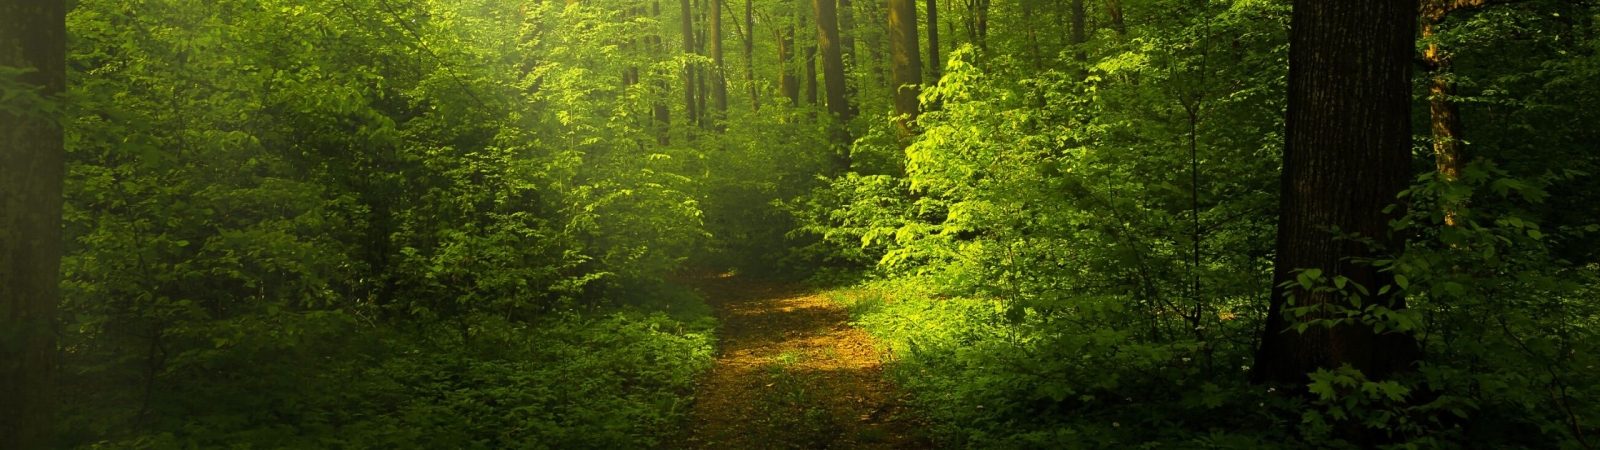 a pathway leading into a lush green forest